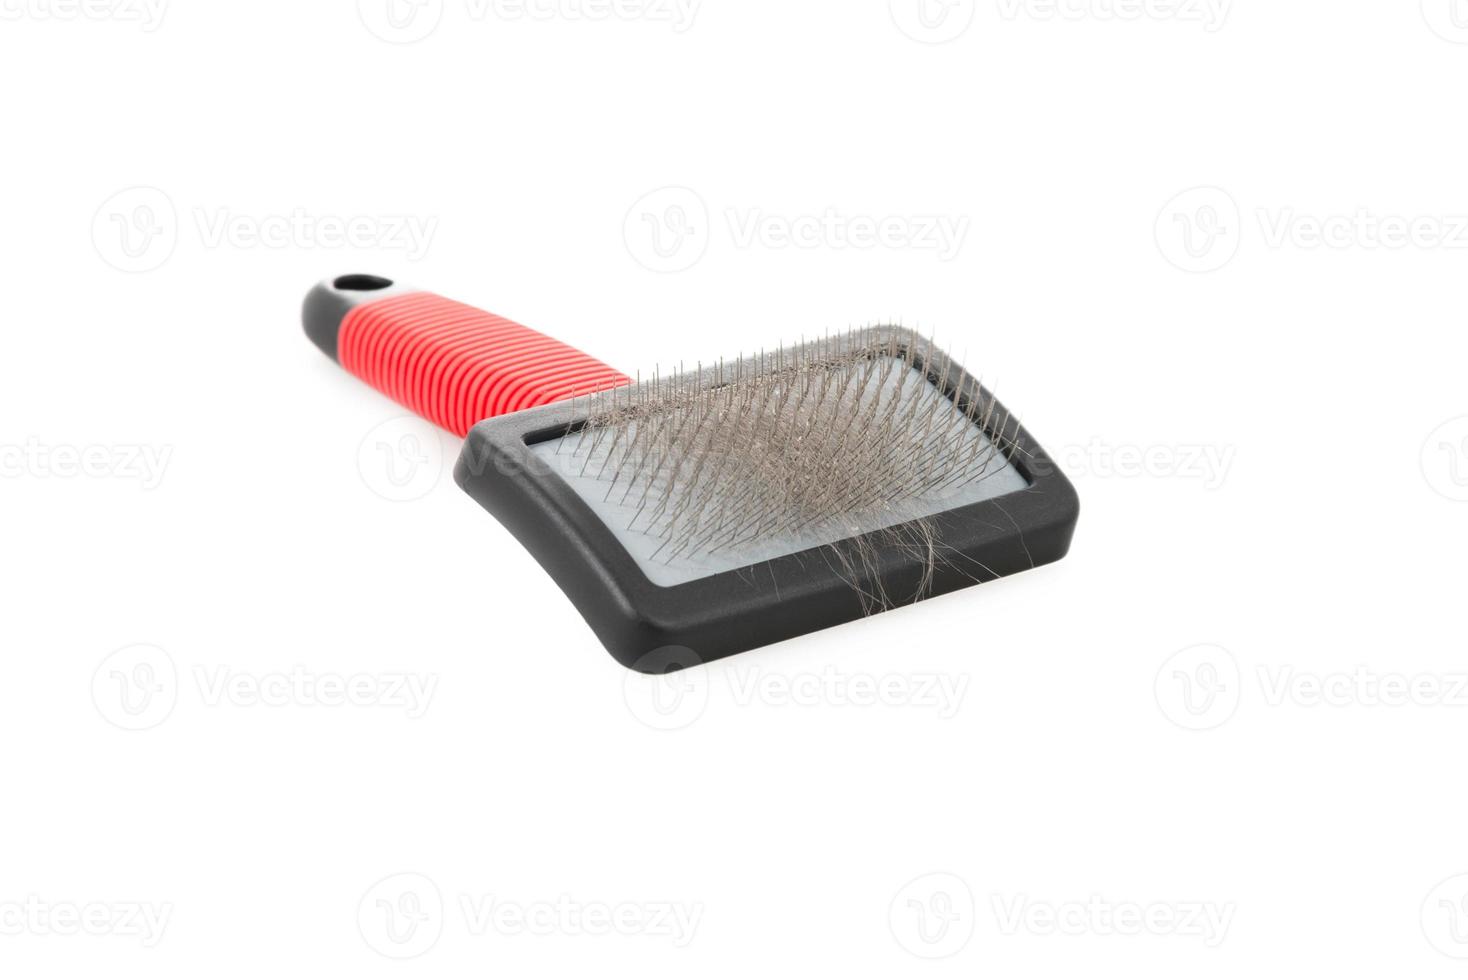 Pet Grooming Brush with Hair, Fur on White Background. photo